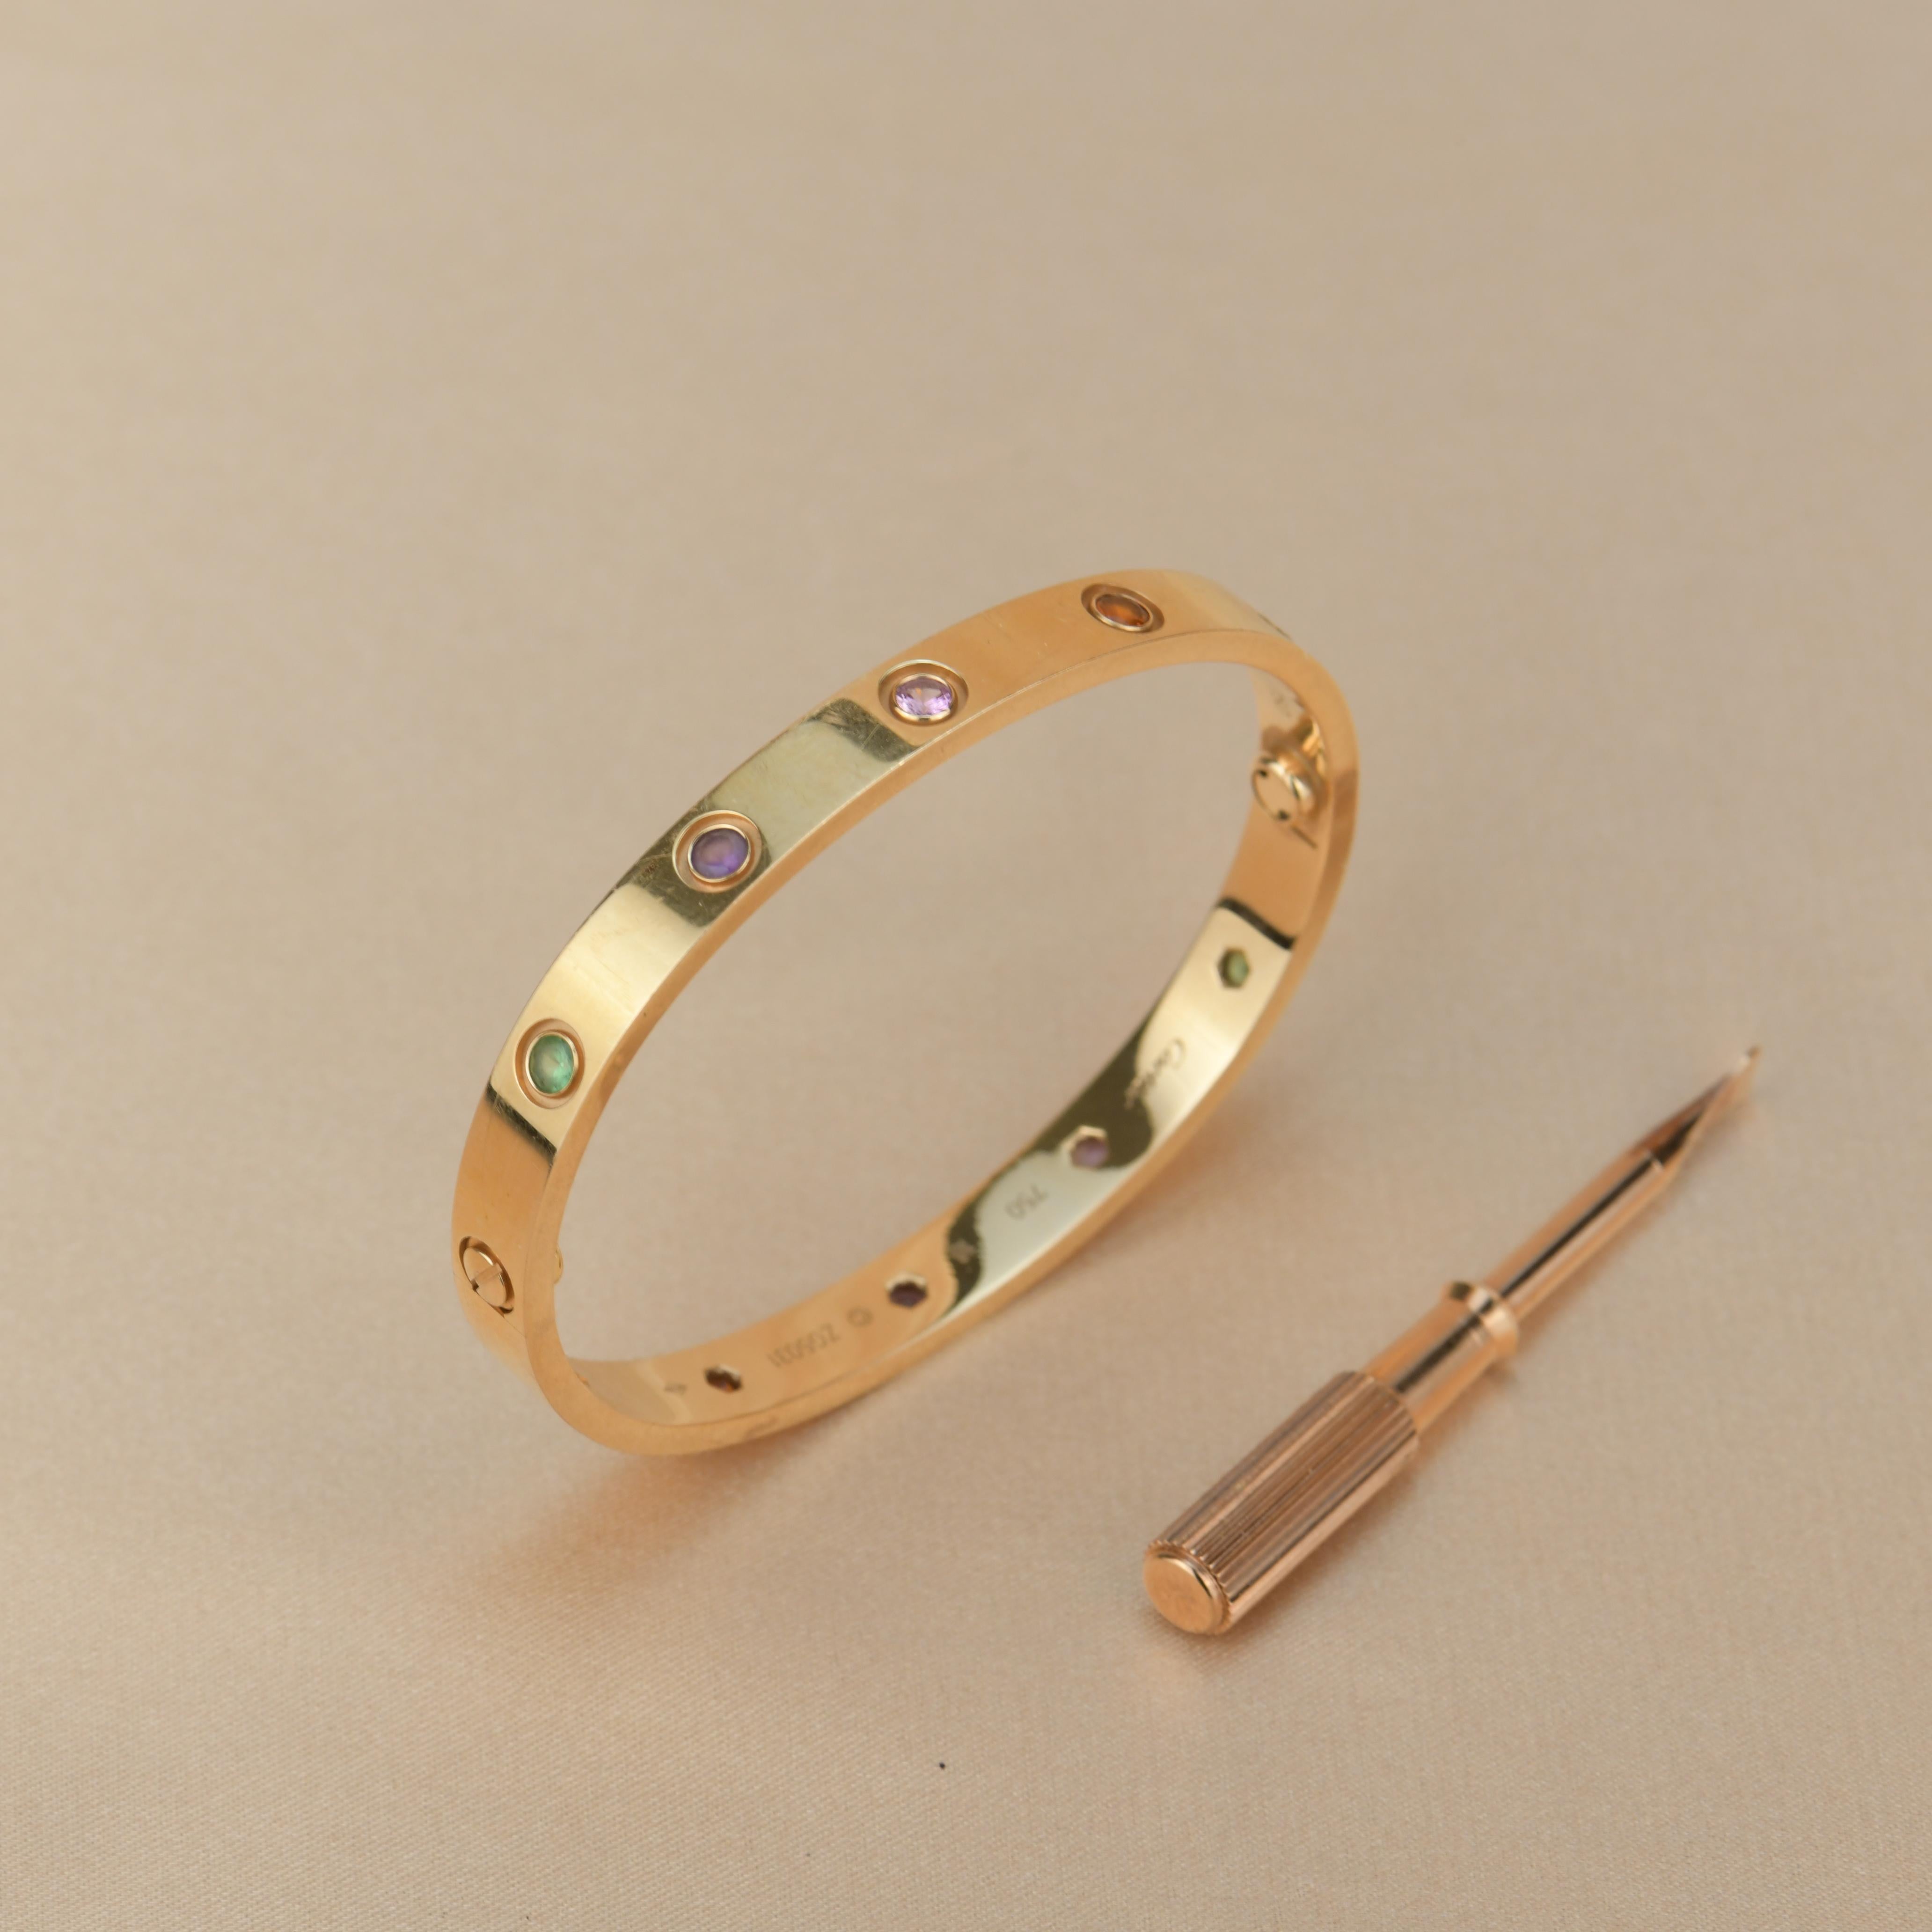 LOVE bracelet, 18K rose gold, set with 2 pink sapphires, 2 yellow sapphires, 2 green garnets, 2 orange garnets, and 2 amethysts. 
Comes with Cartier Box. Size 16
__________________________________

Dandelion Antiques Code AT-0799
Brand Cartier
Model